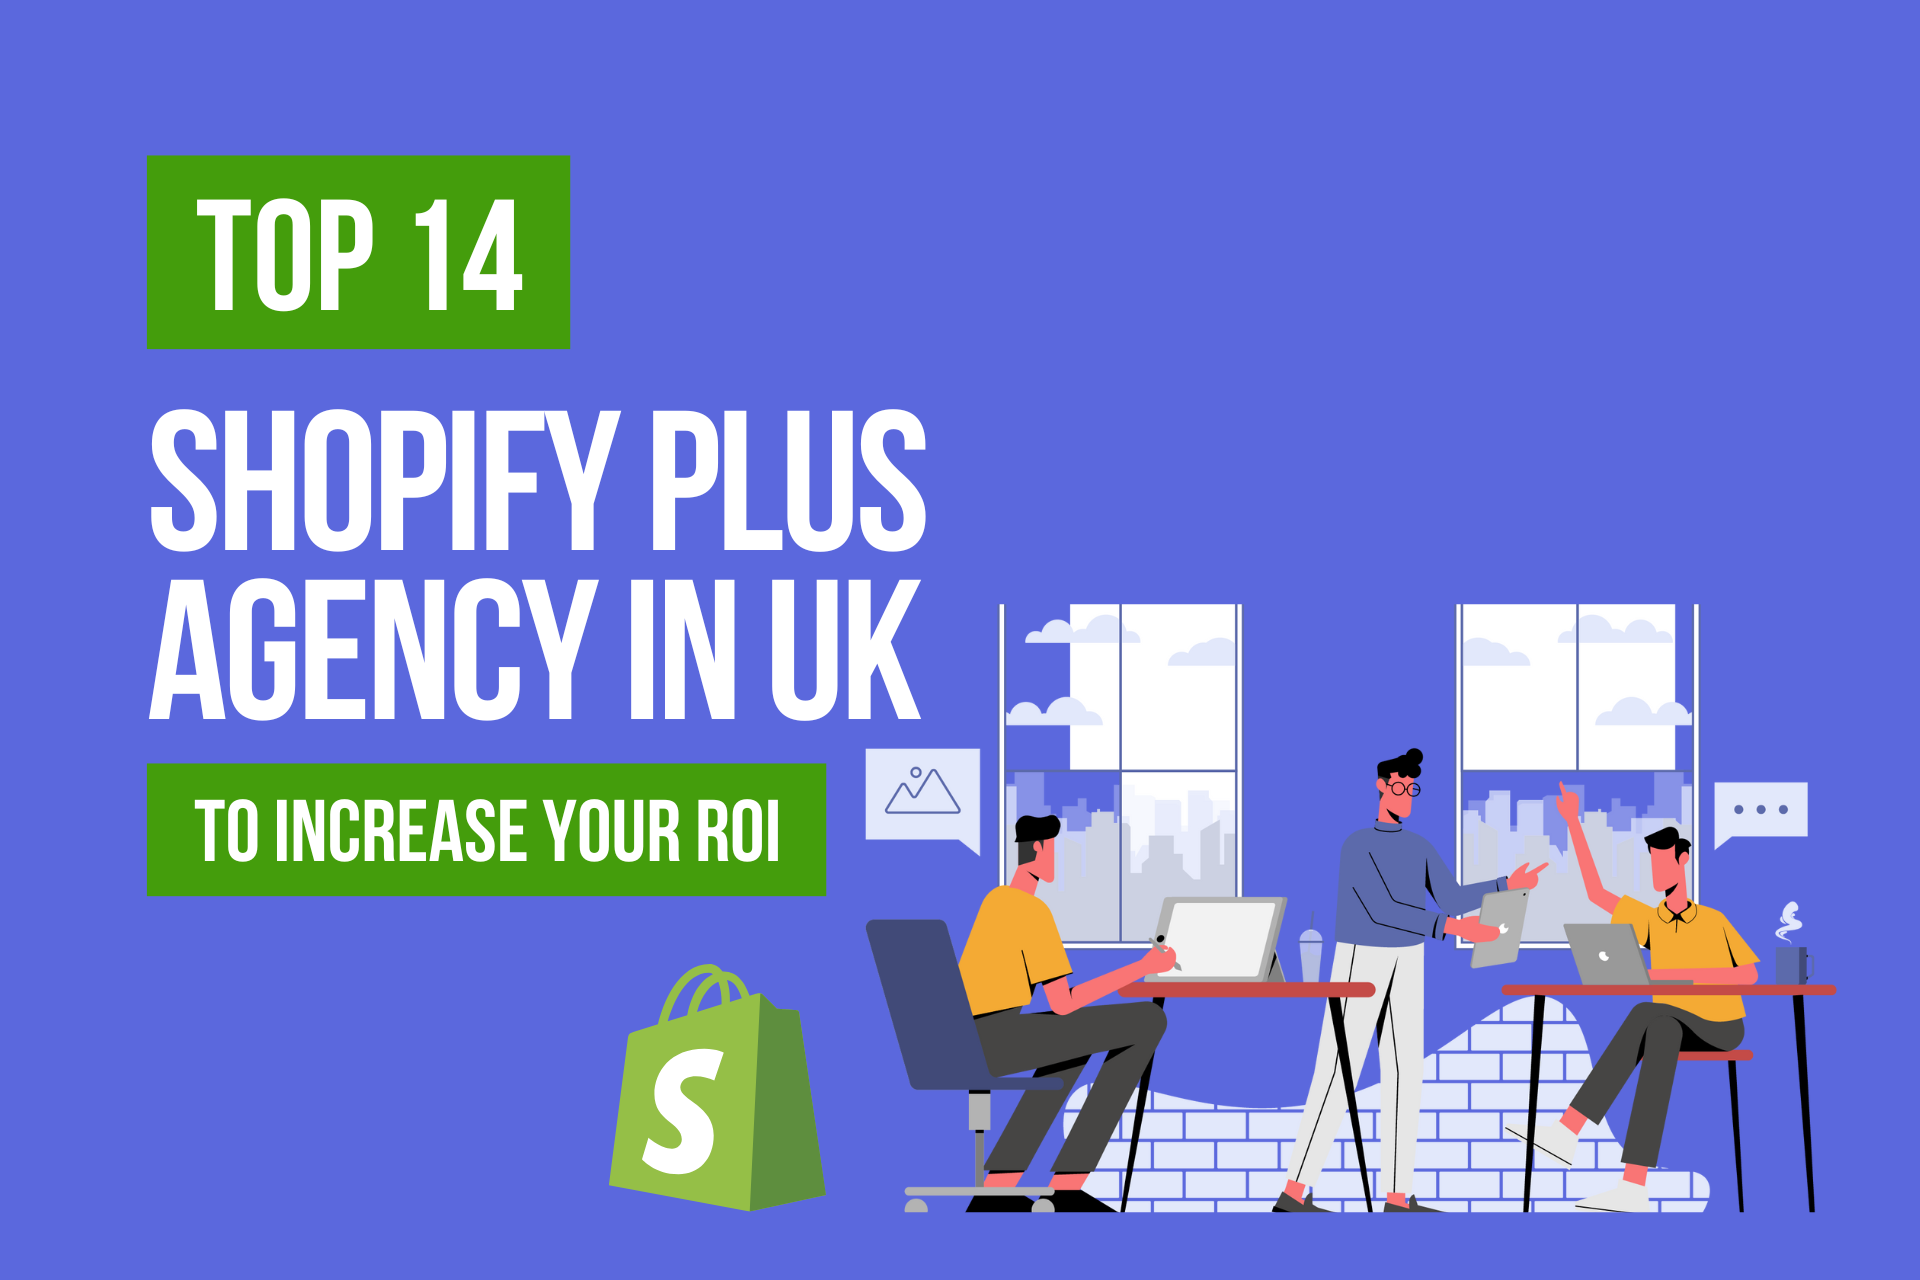 Top Shopify Plus Agency in UK to Boost Your ROI